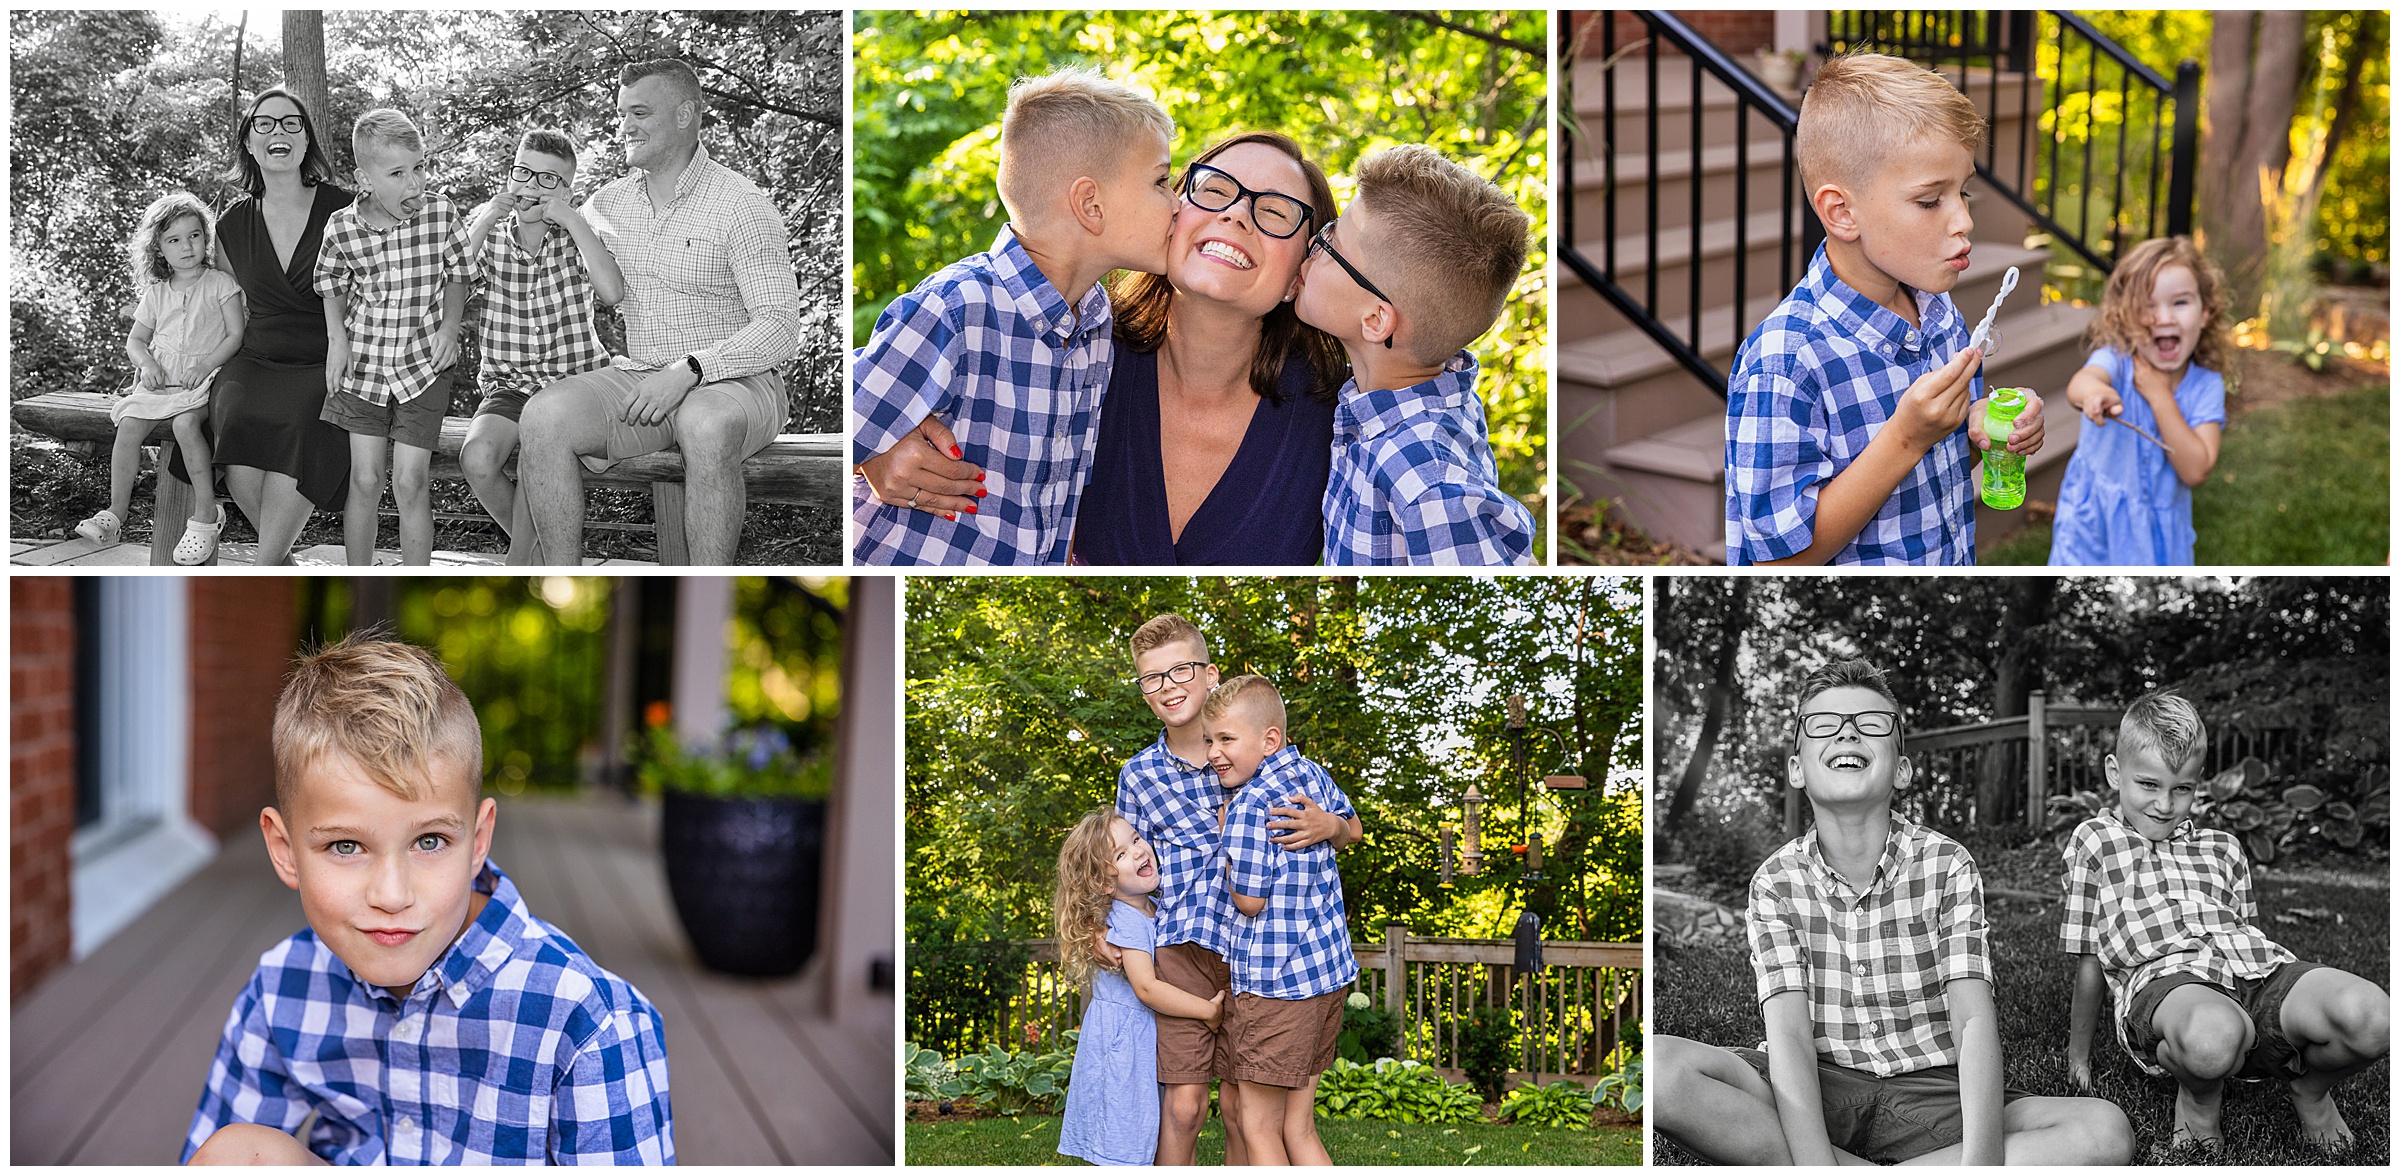 collage of photos from family photo session in backyard